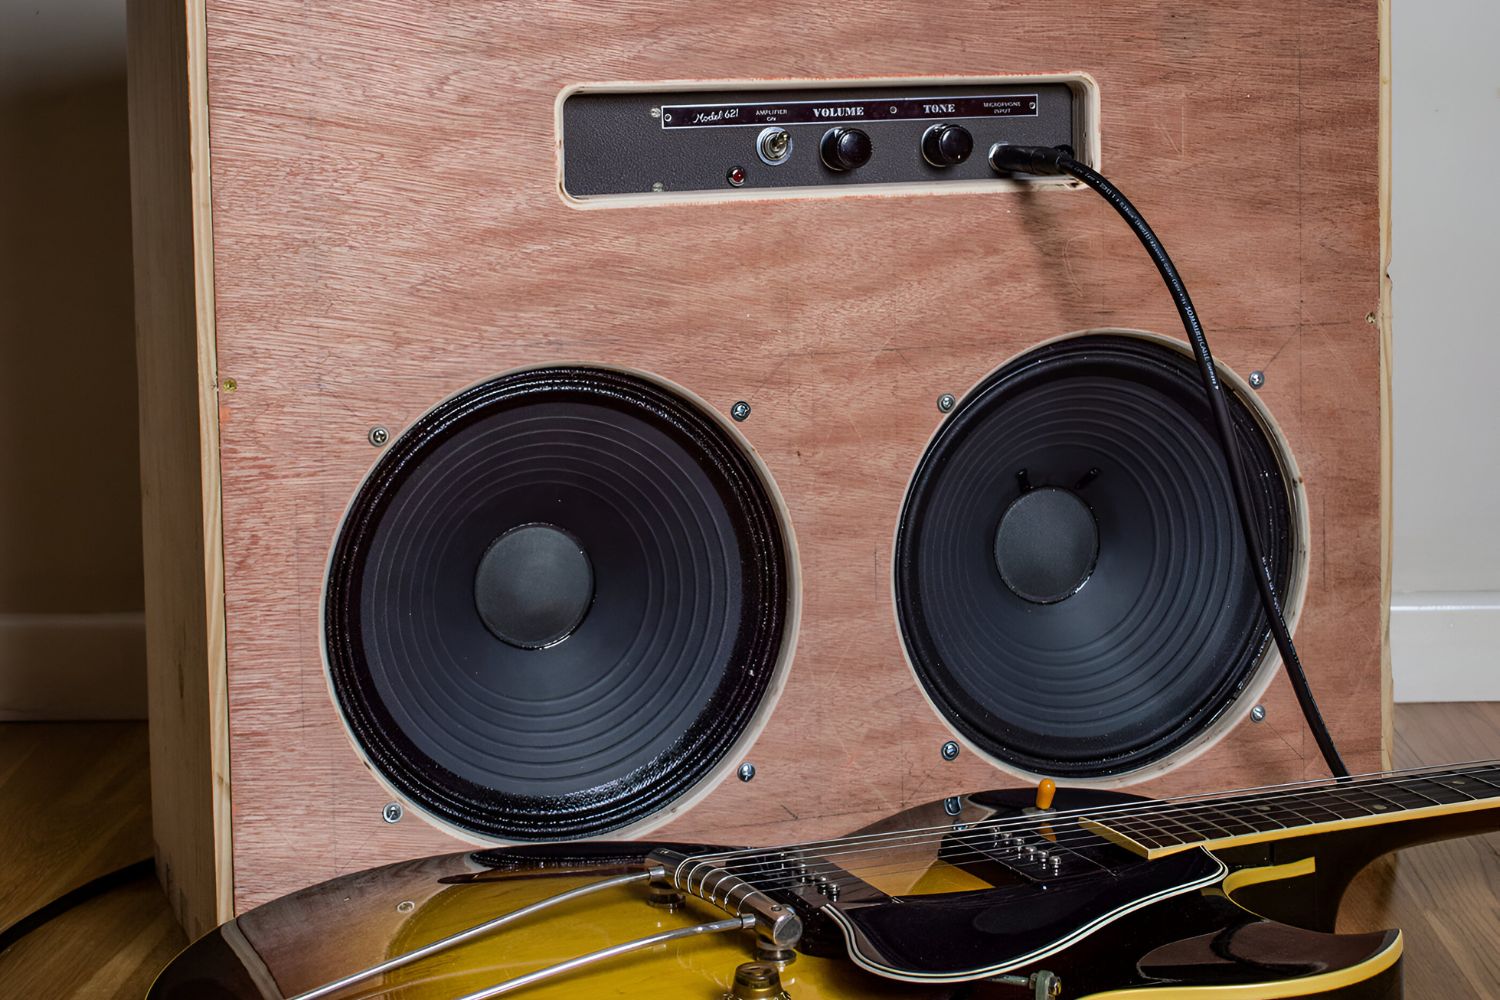 How To Connect An Electric Guitar To Speakers